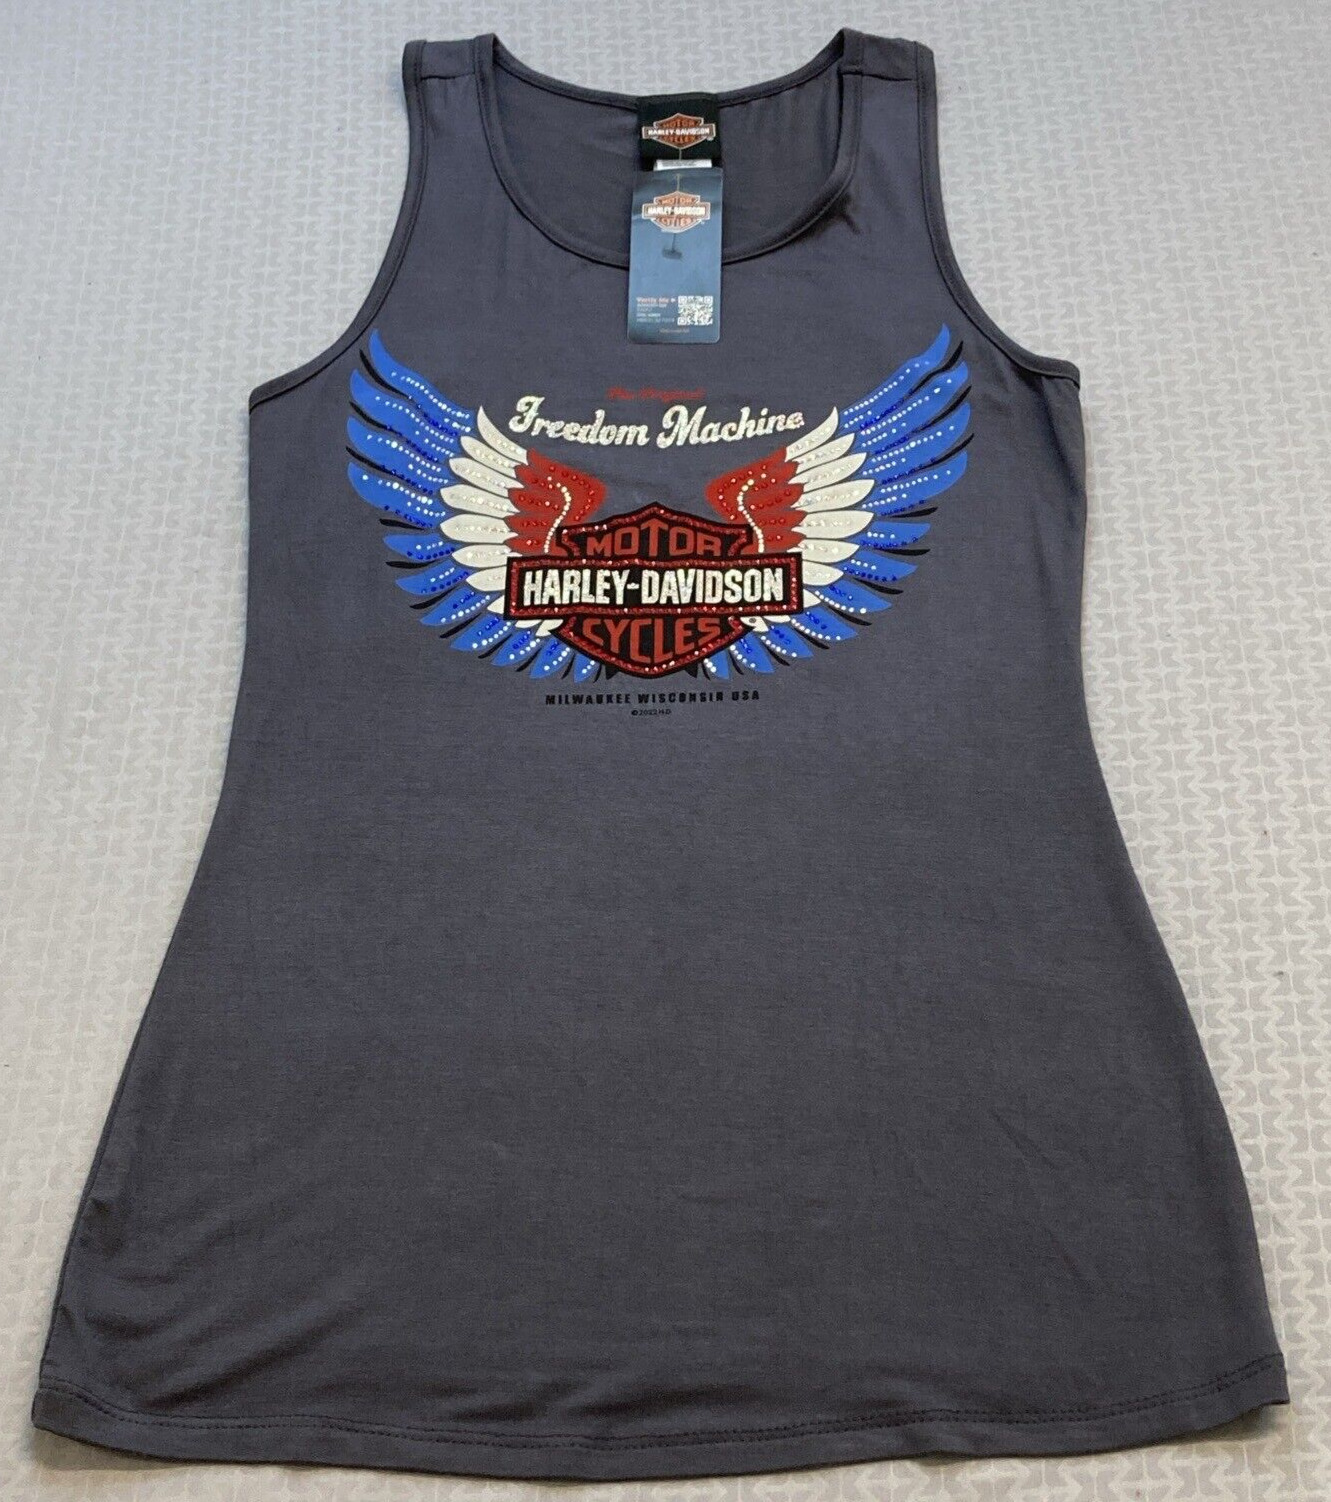 NEW GENUINE HARLEY DAVIDSON HT4697 XL SPREAD YOUR WINGS S/L SCOOP NECK GREY